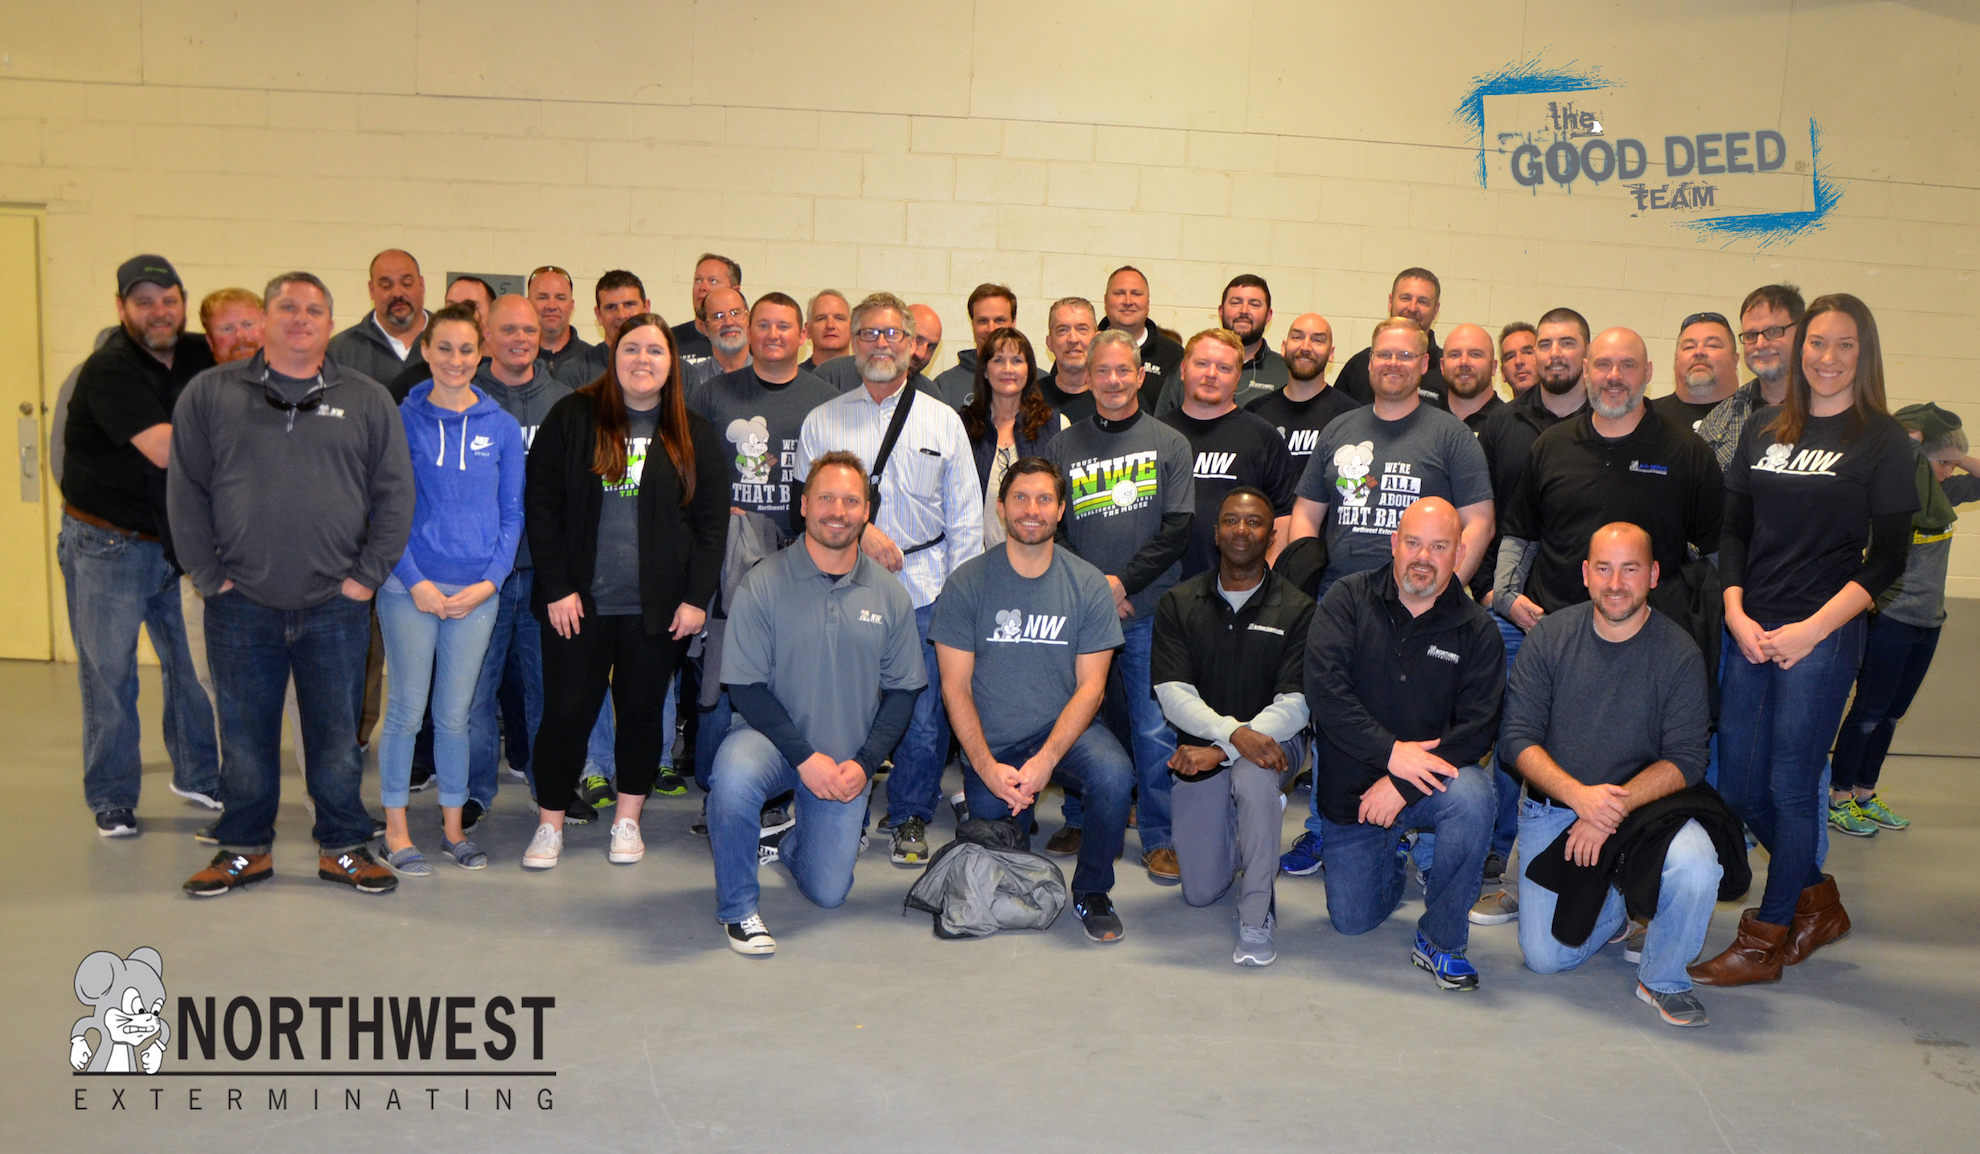 Northwest Exterminating's Good Deed Team Participates in “From Hunger to Hope” Initiative with Feed My Starving Children in Gwinnett